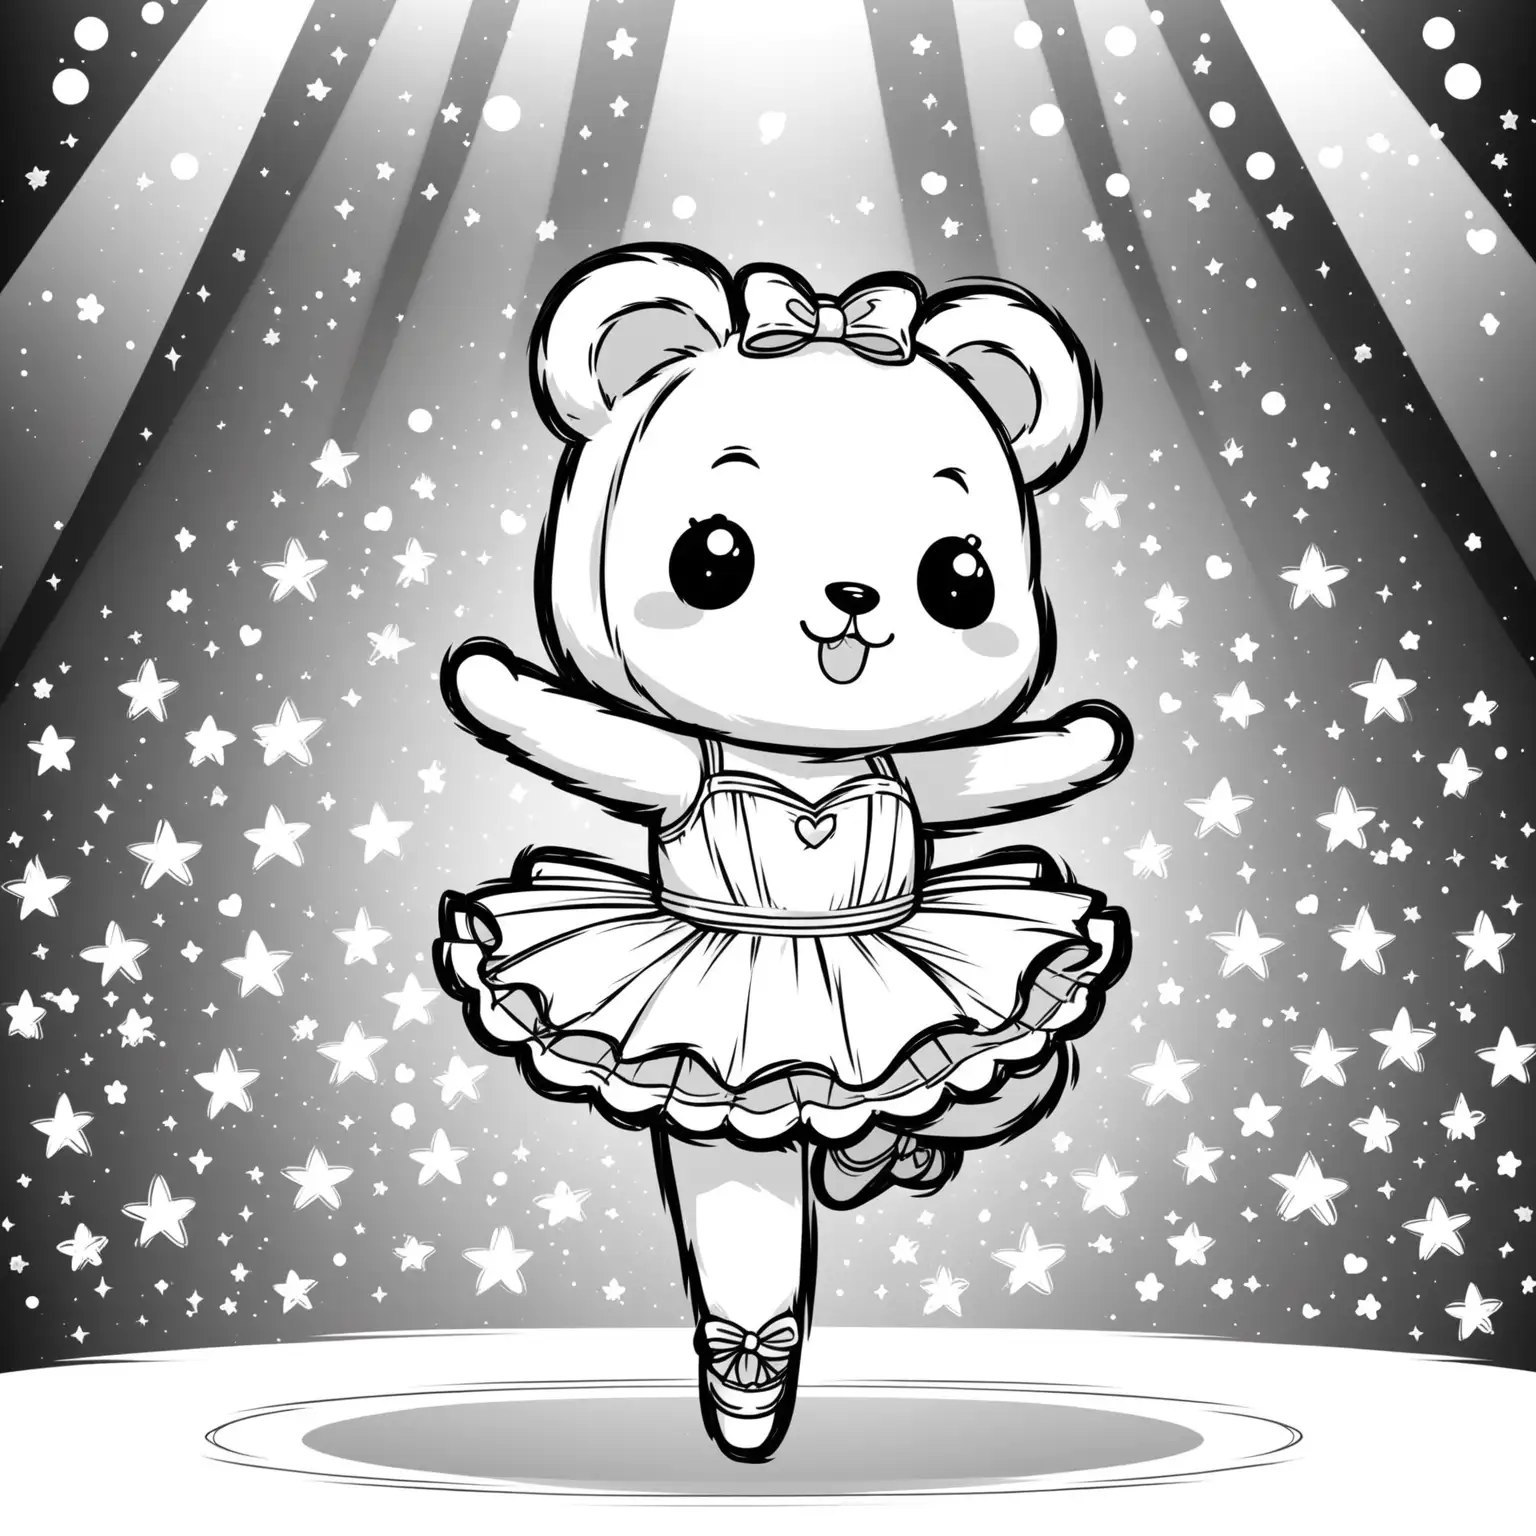 coloring image for young children, outline only, thick bold lines, no grayscale, no background, black and white. kawaii ballerina bear dancing on a stage